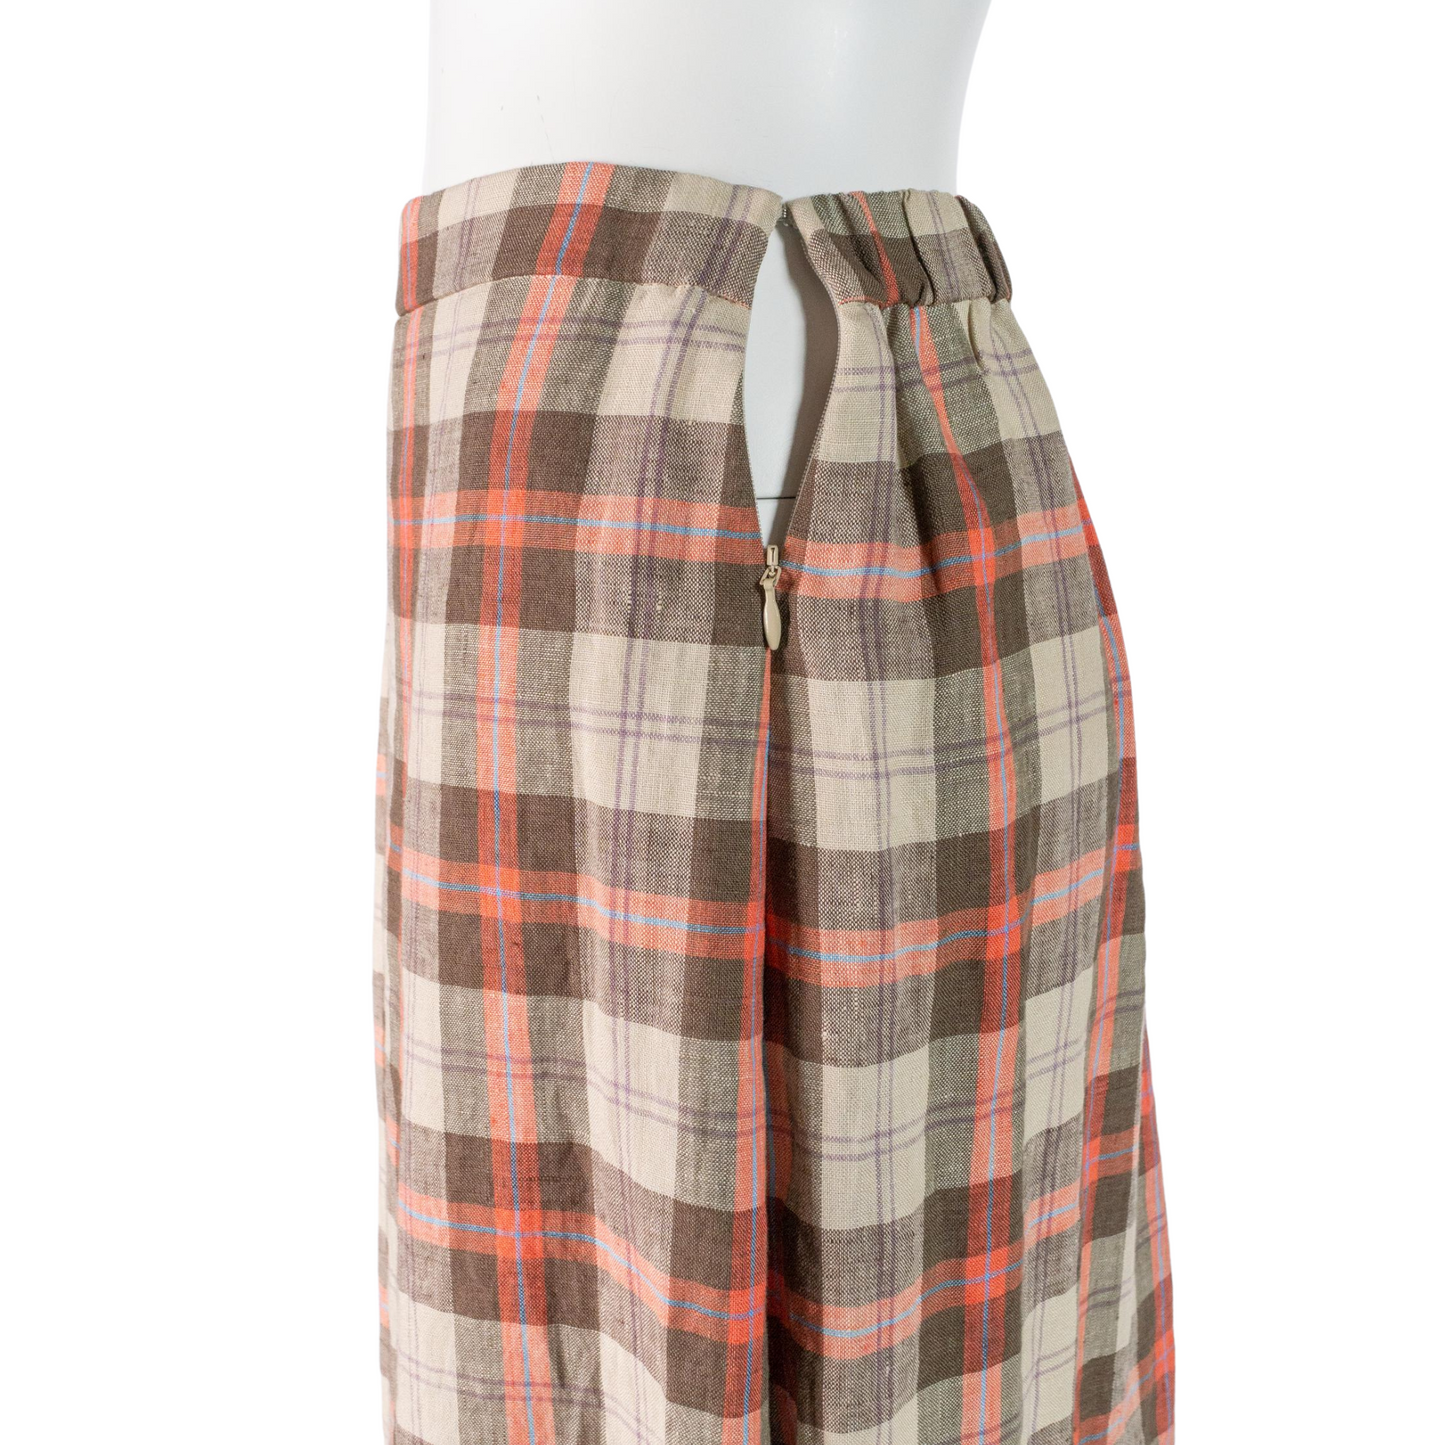 PASSIONE LINEN CHECK WRAR LIKE SKIRT